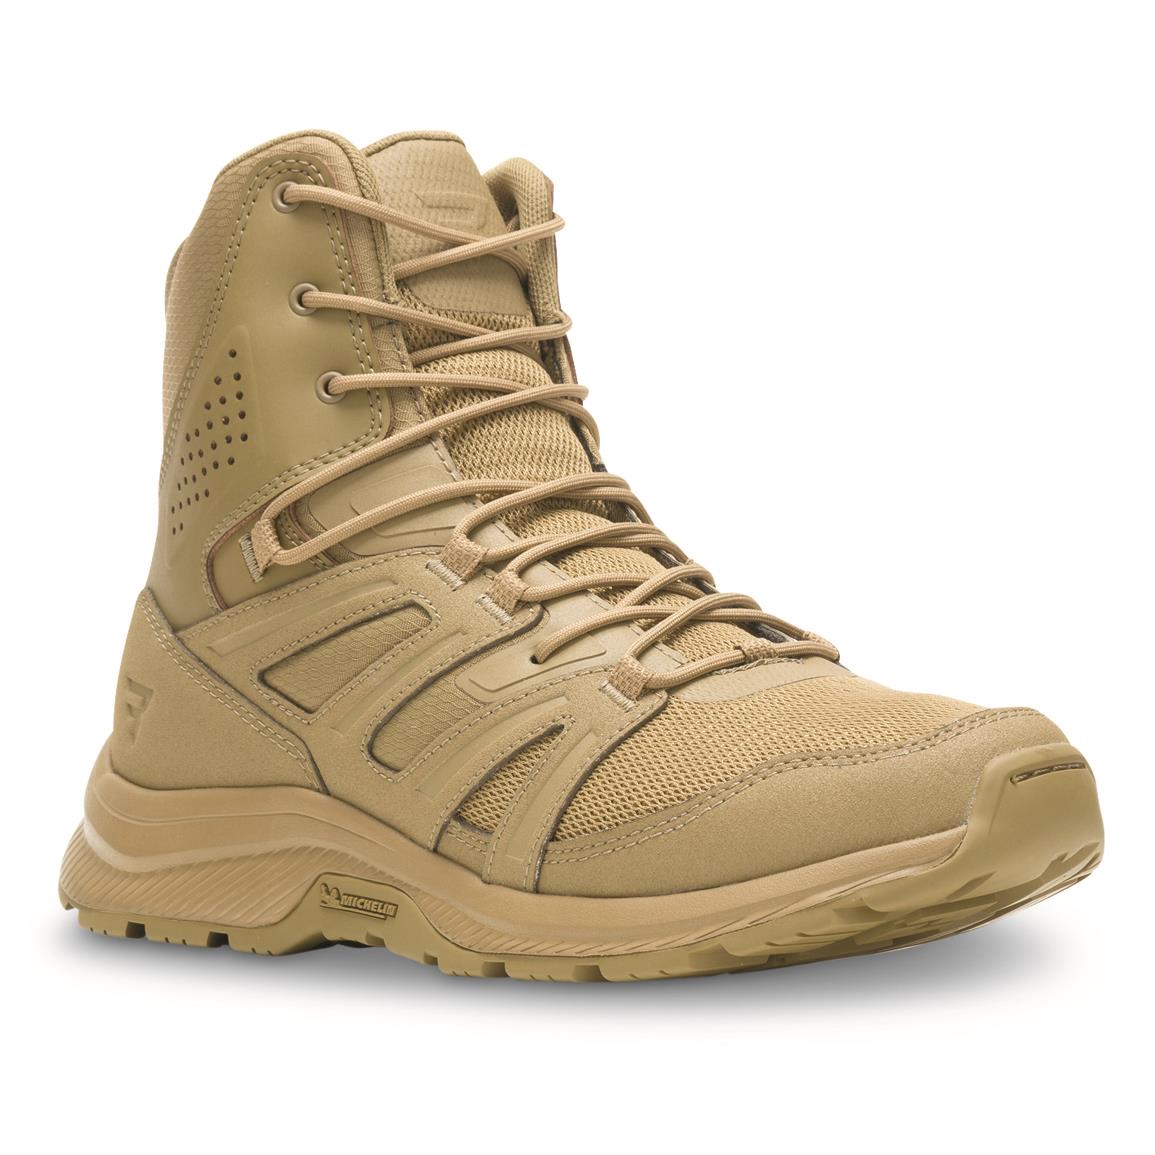 Bates Men's Rallyforce Tall Side-Zip Duty Boots, Coyote